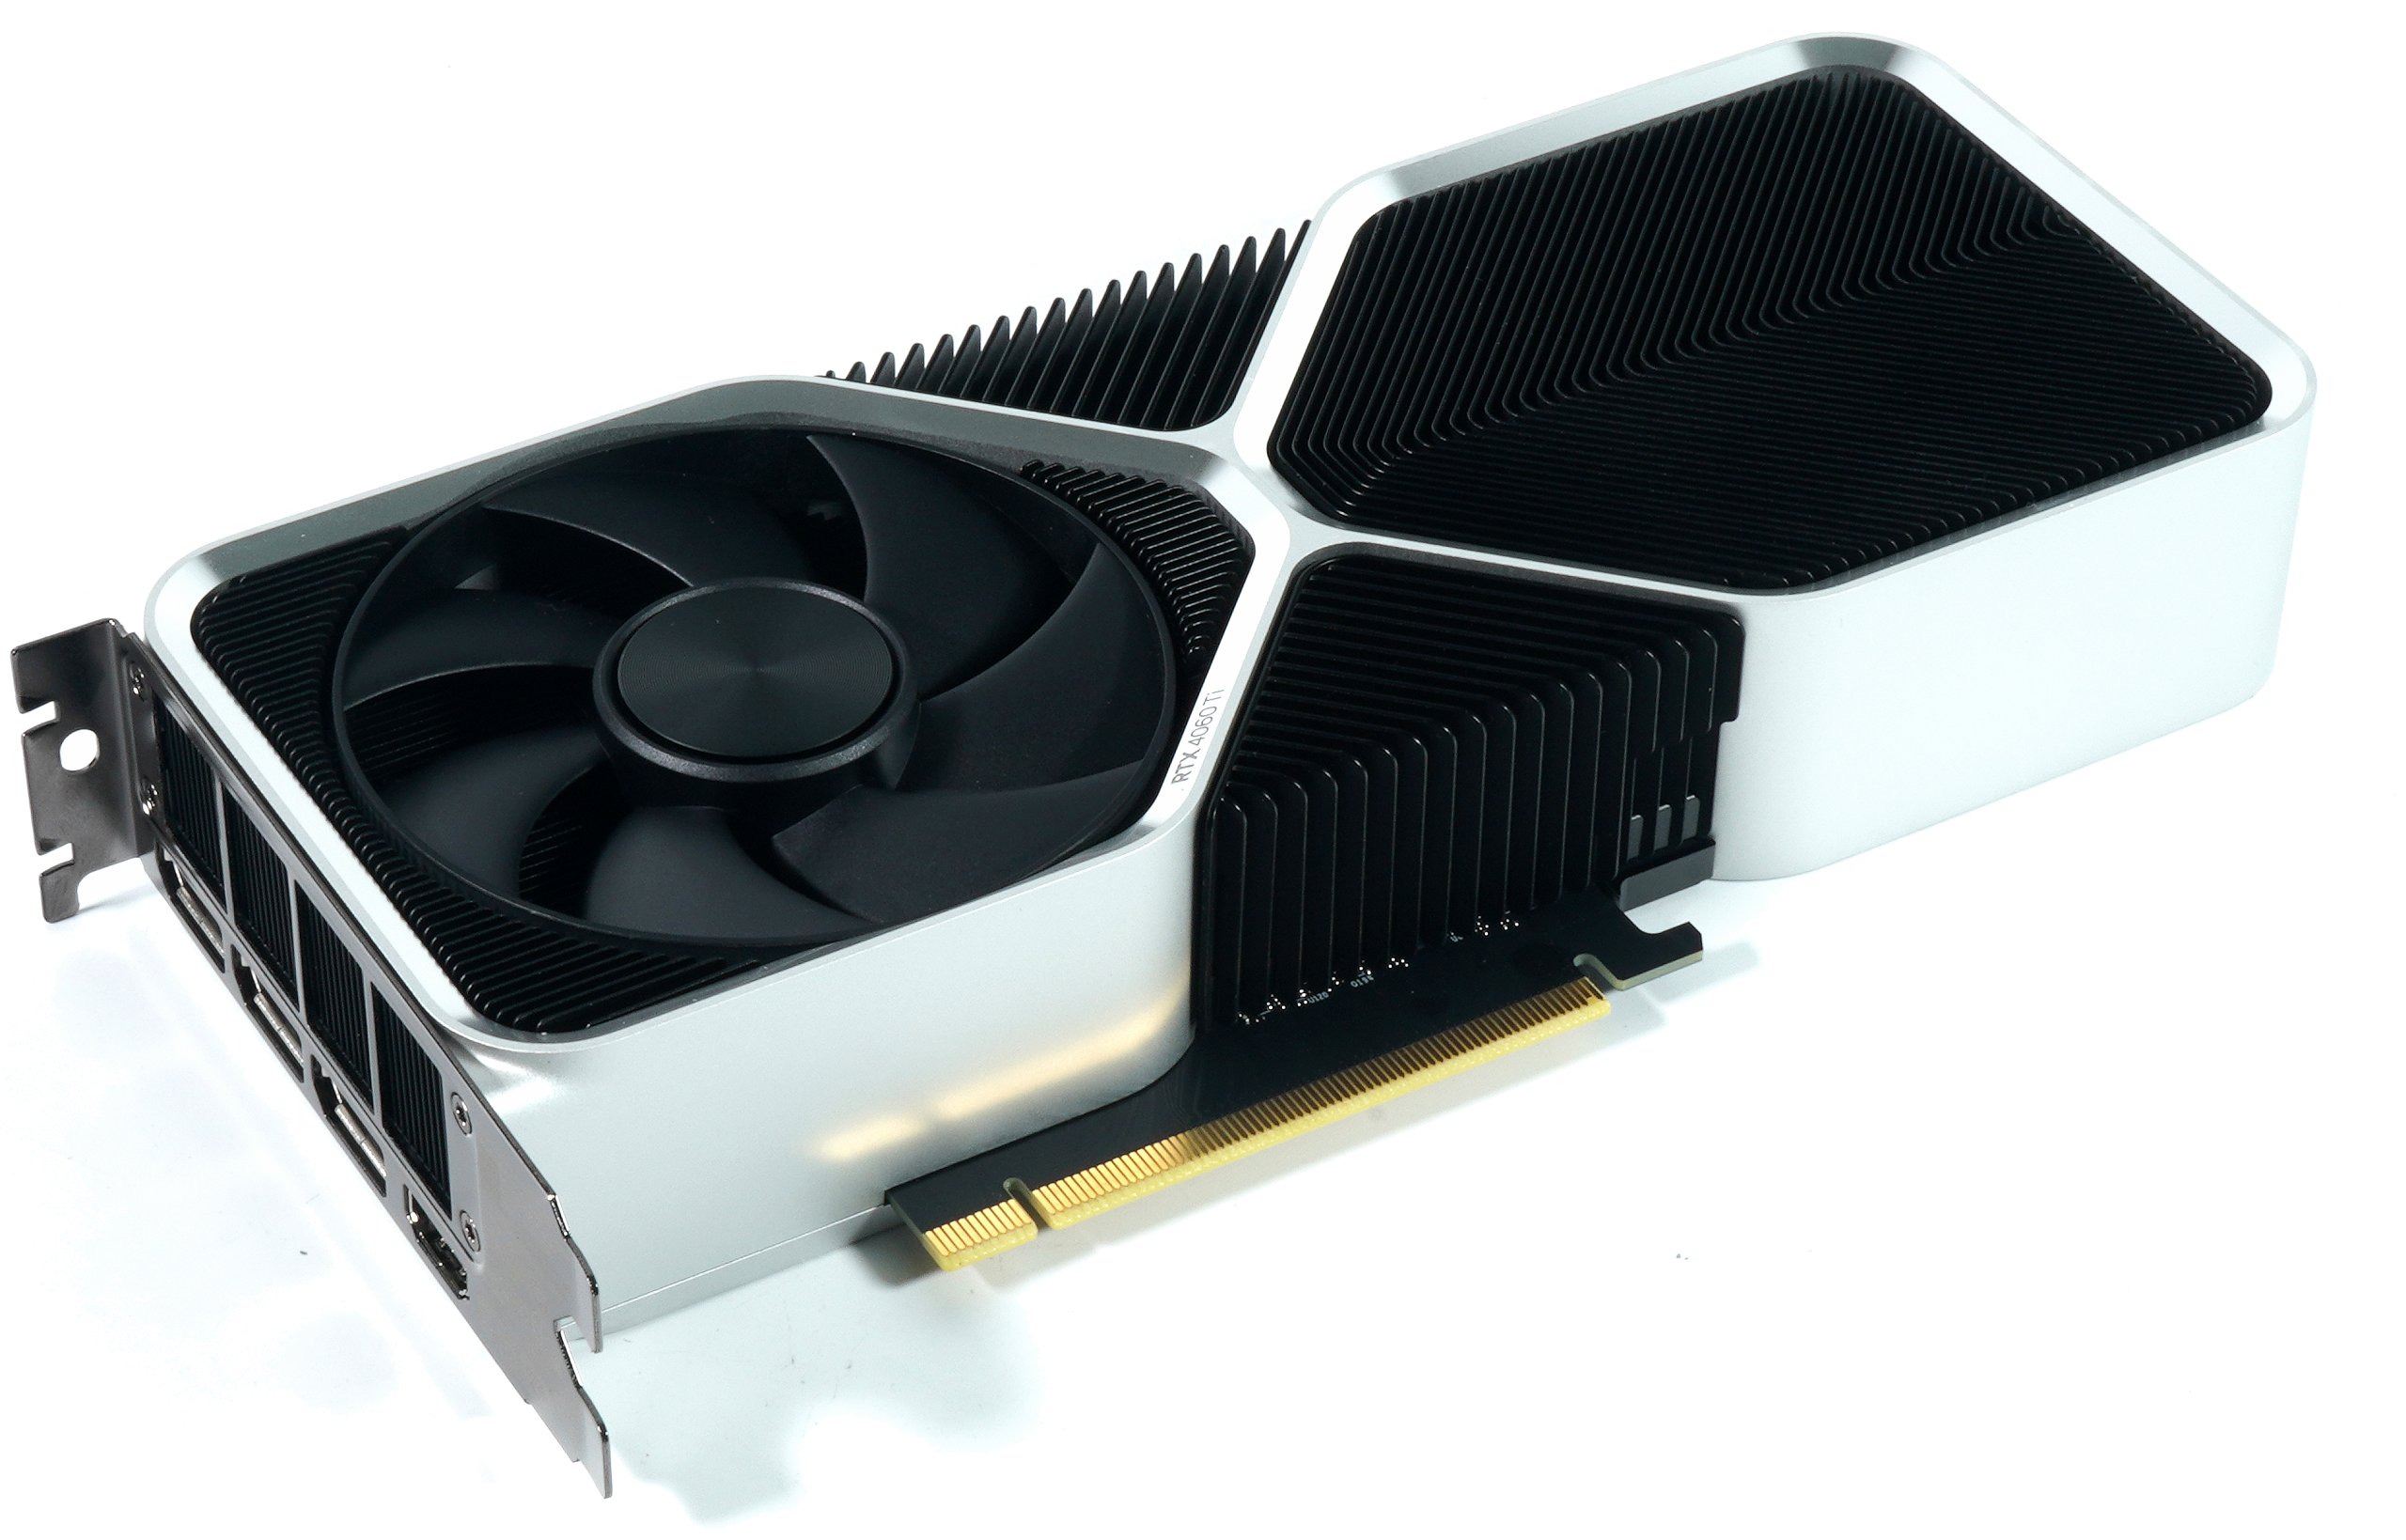 NVIDIA GeForce RTX 4060 Ti Founders Edition Review - DLSS3 Frame Generation